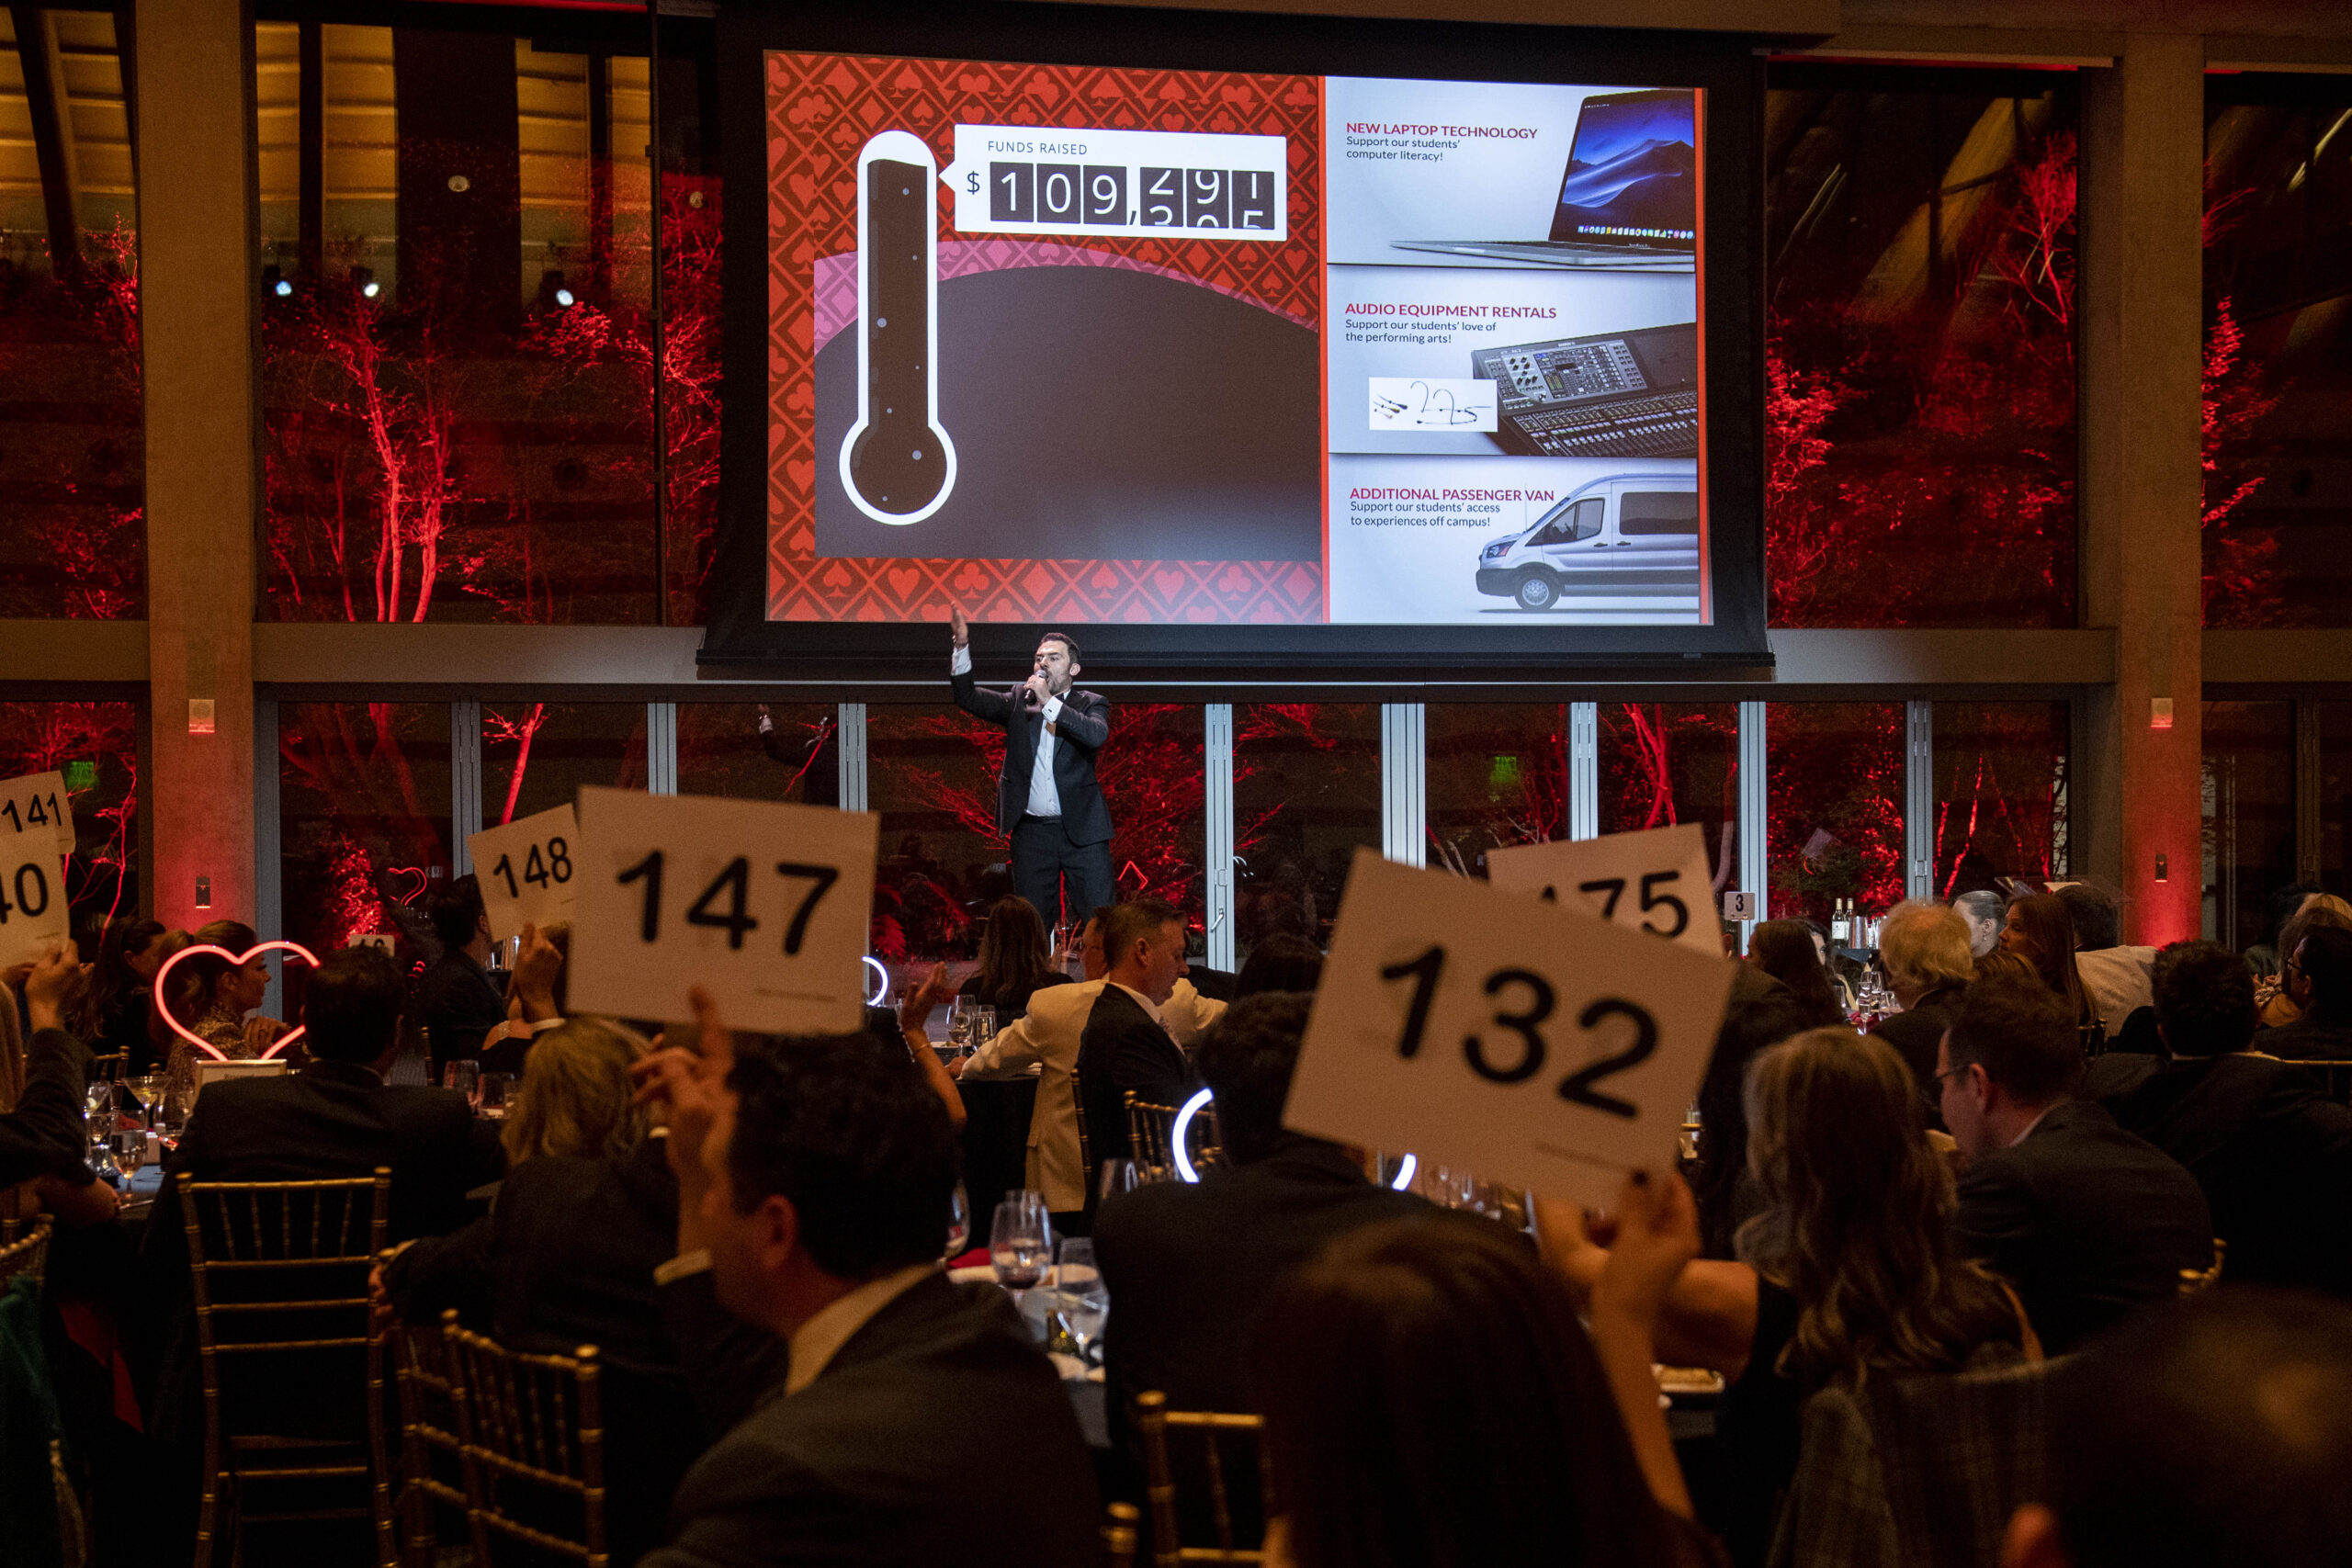 Benefit Charity Auctioneer Los Angeles - Dukas Auctioneer Group